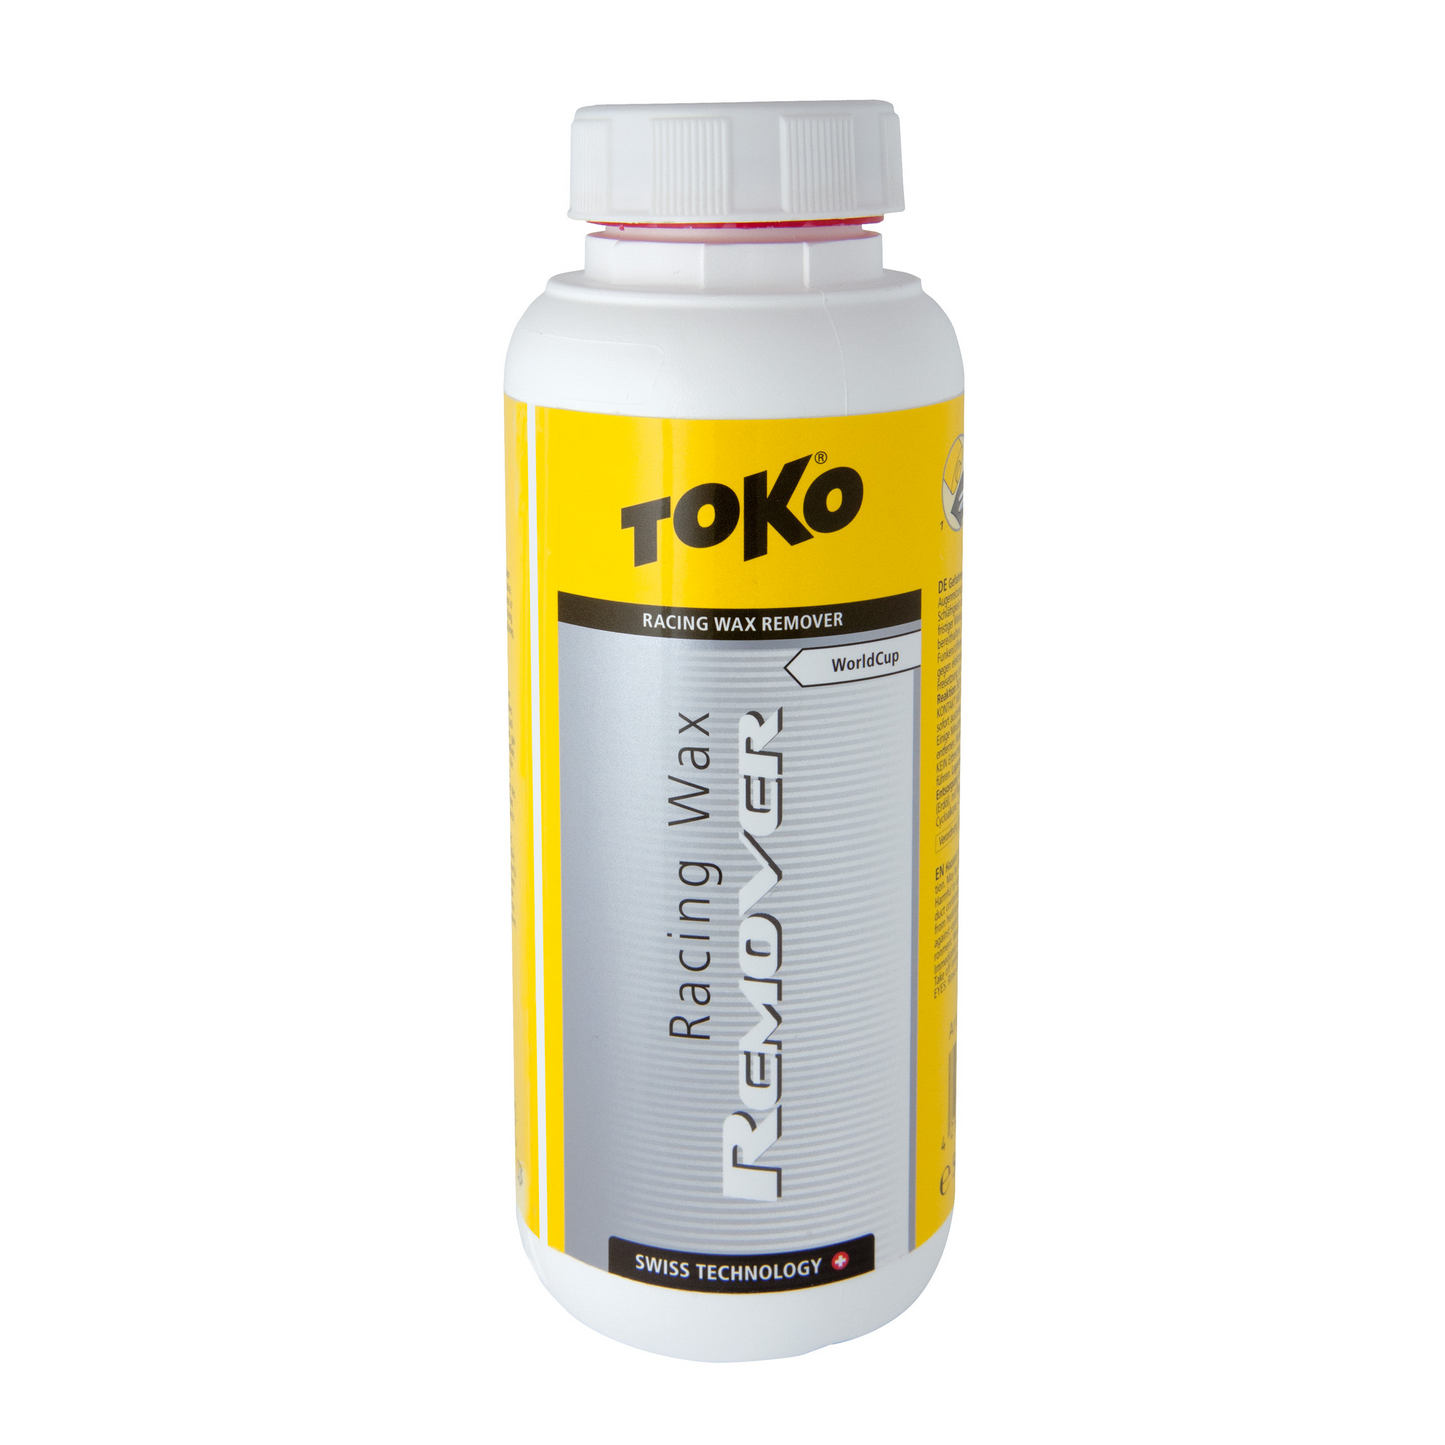 A product picture of the Toko Racing Waxremover